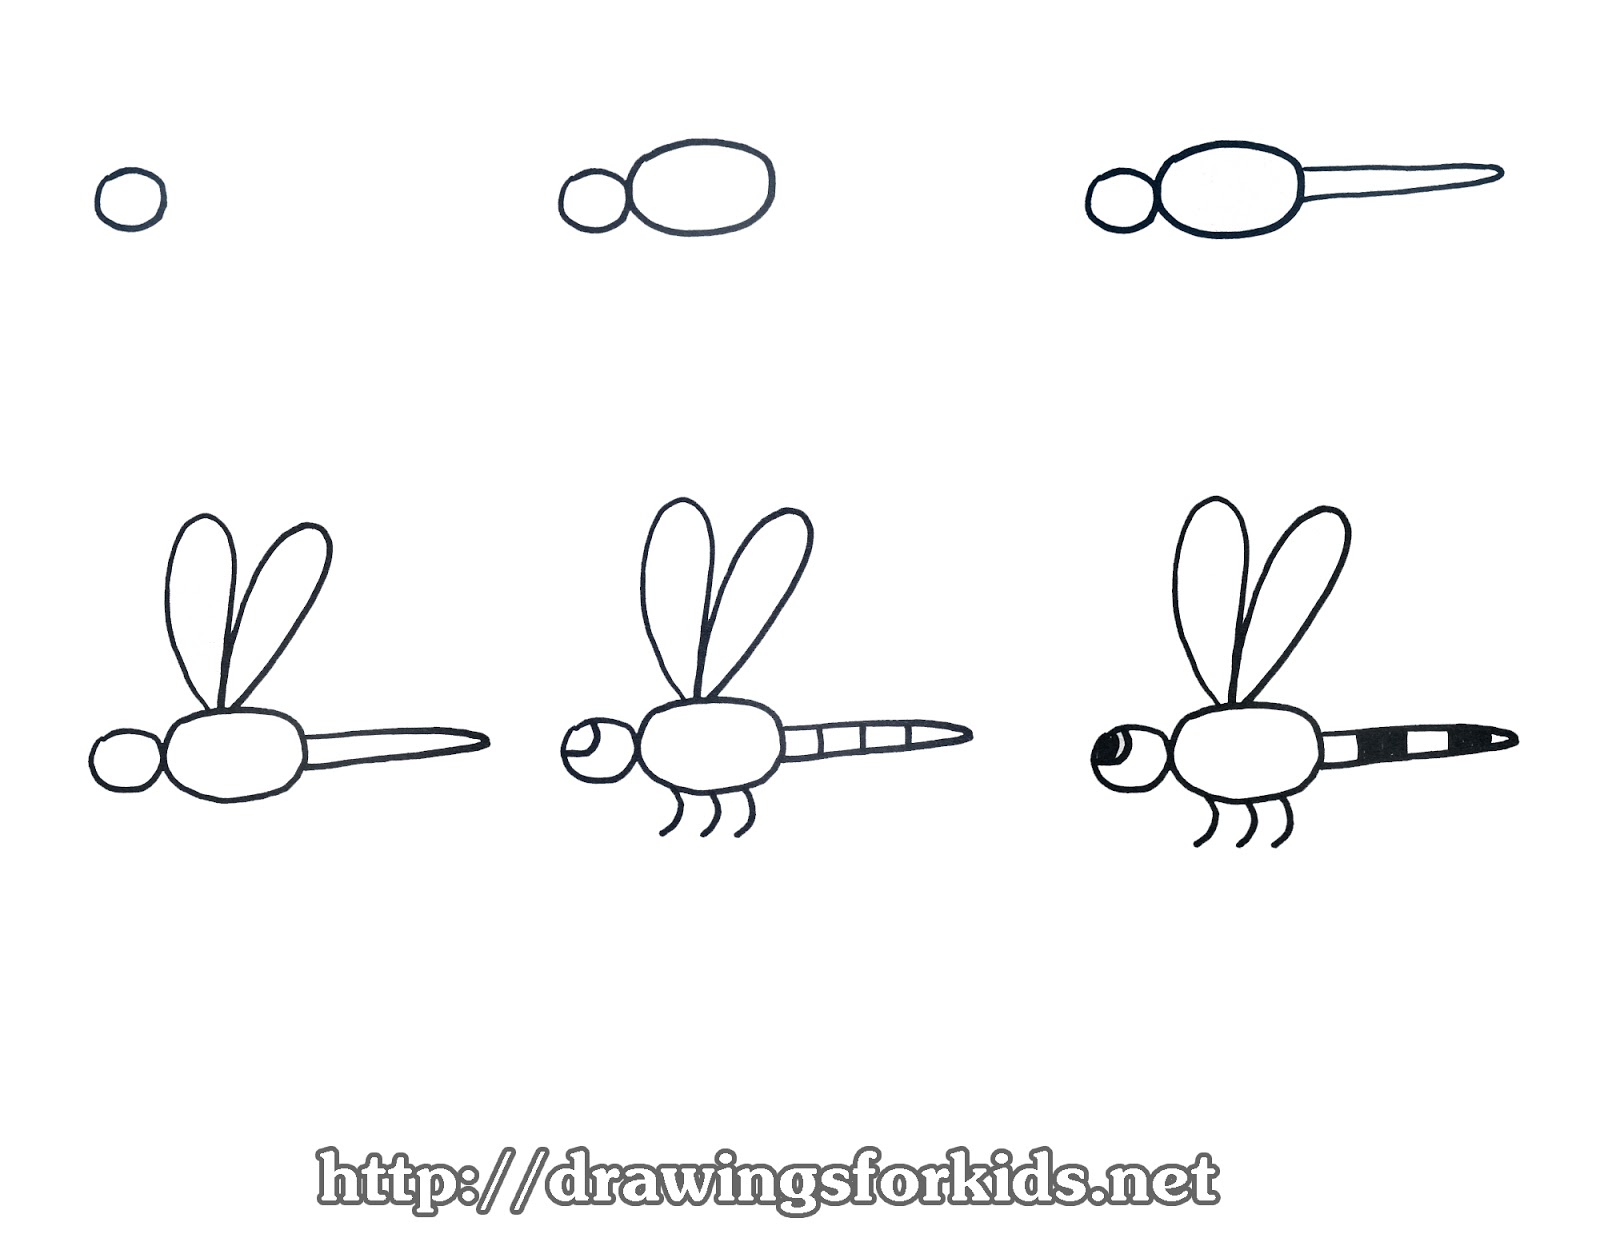 How to draw a dragonfly for kids - drawingsforkids.net